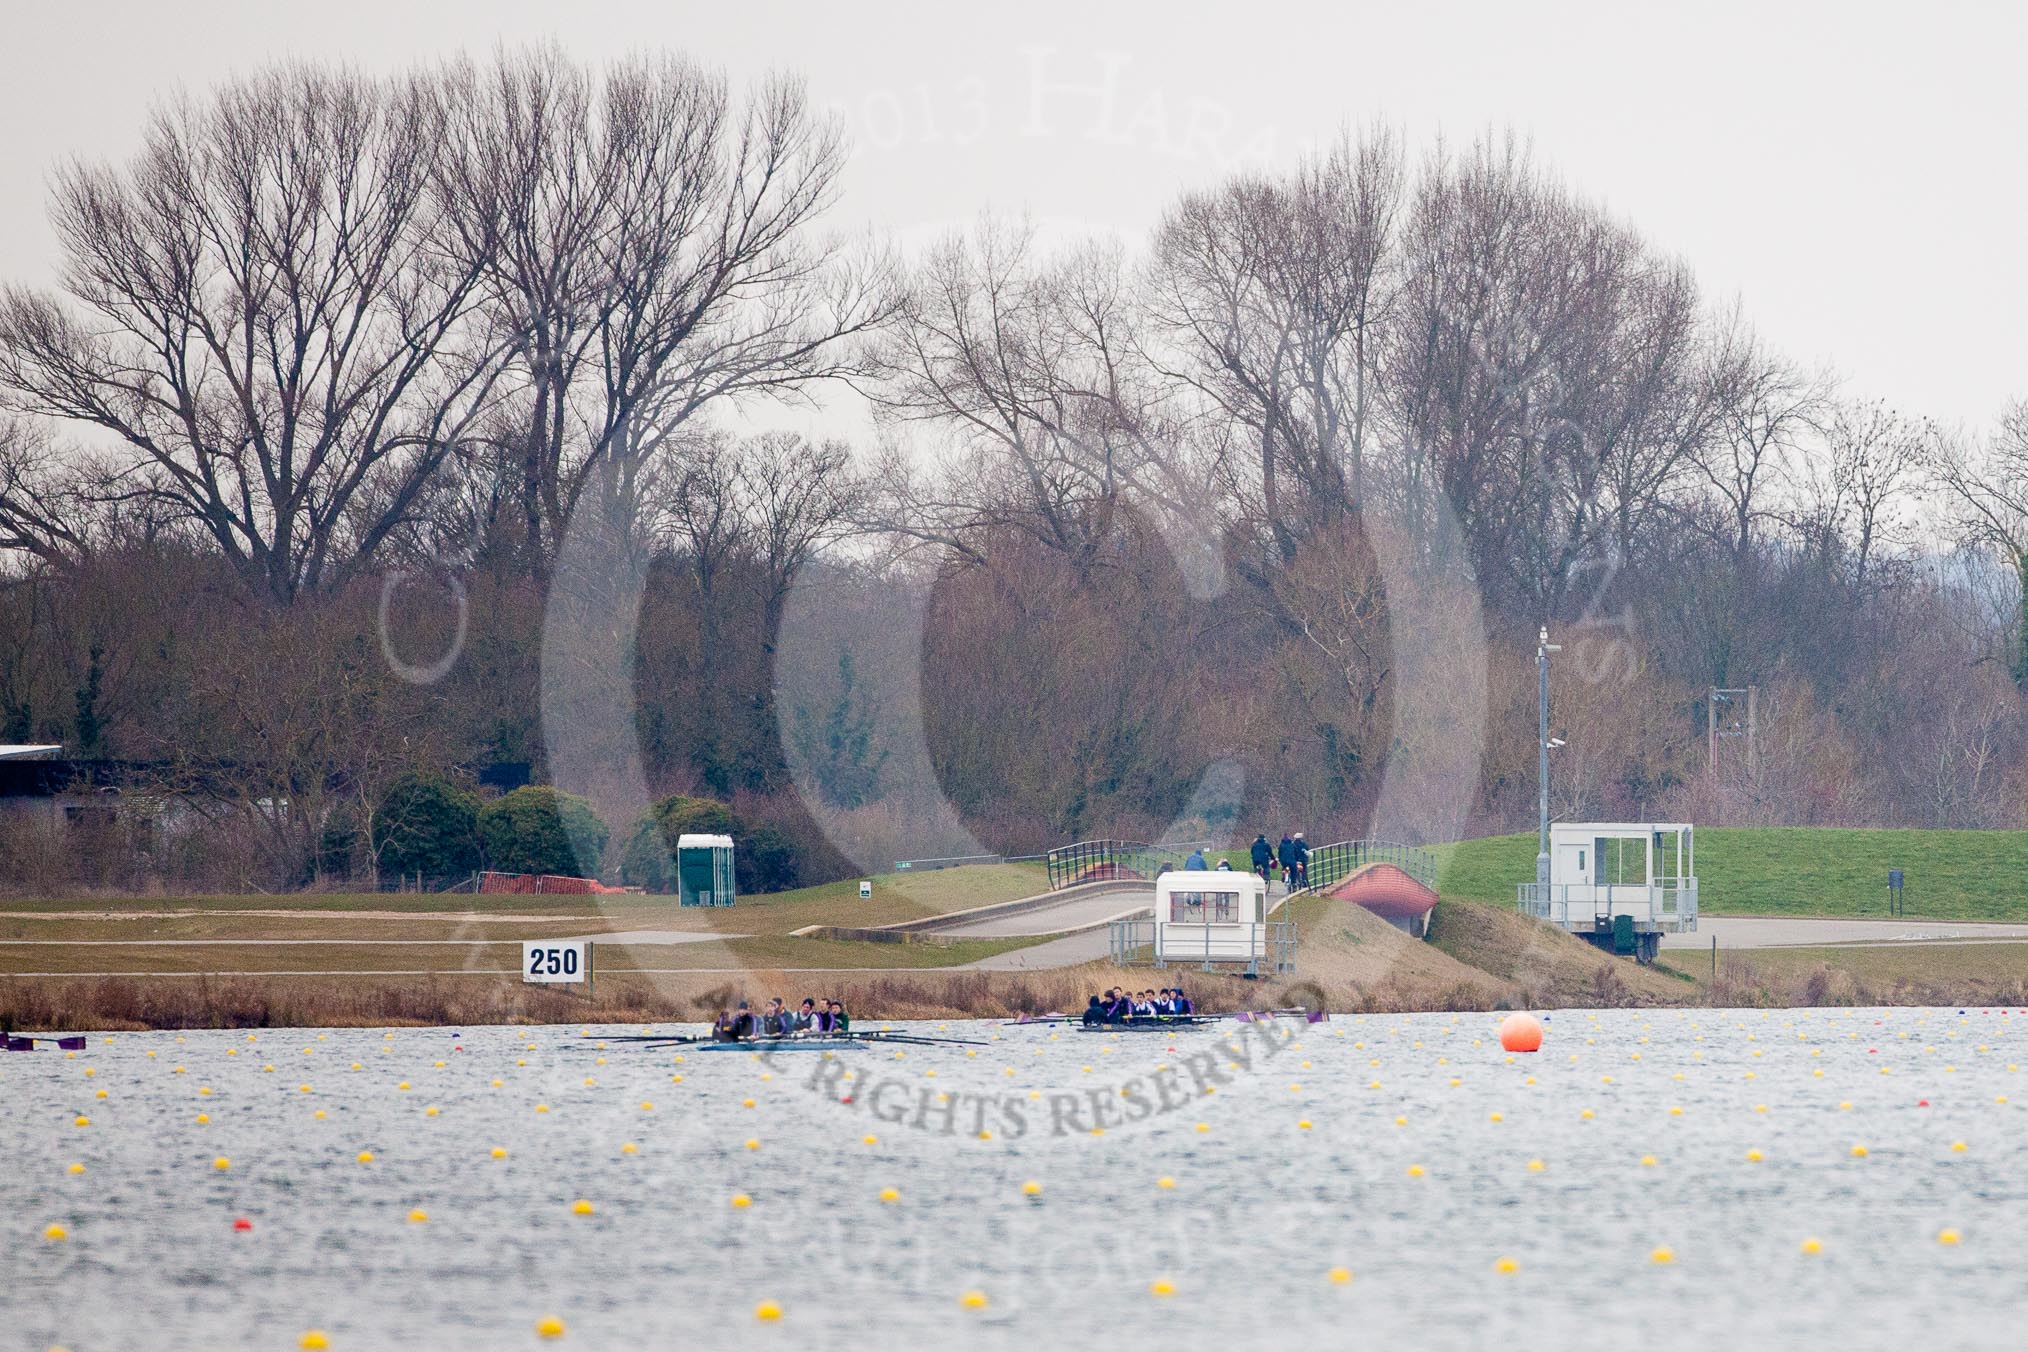 The Boat Race season 2013 - fixture OUWBC vs Molesey BC: Boats on Dorney Lake, with on of the bridges of the return channel in view..
Dorney Lake,
Dorney, Windsor,
Berkshire,
United Kingdom,
on 24 February 2013 at 11:37, image #55